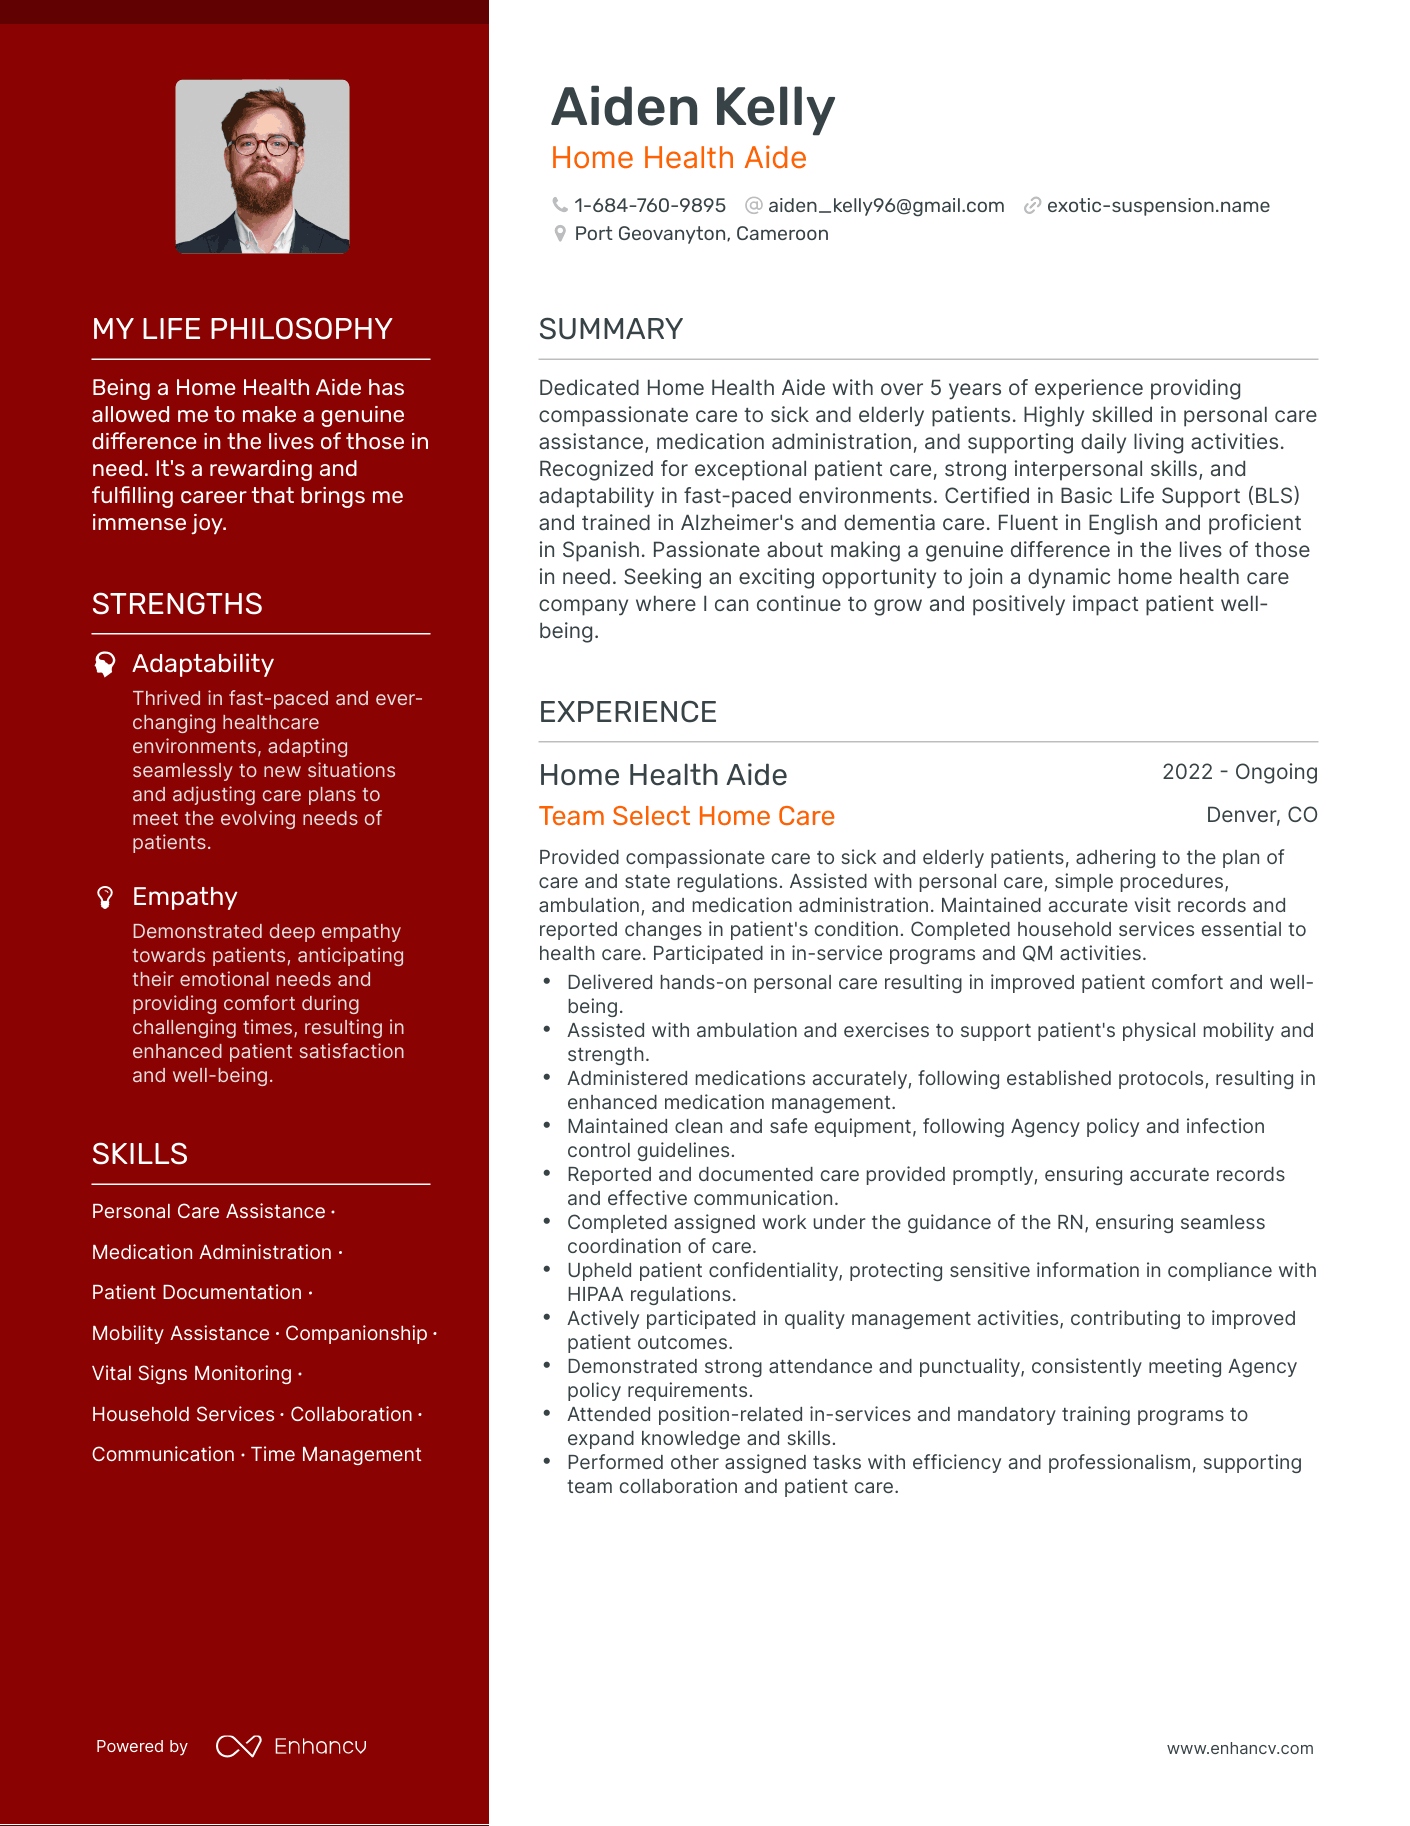 Home Health Aide resume example